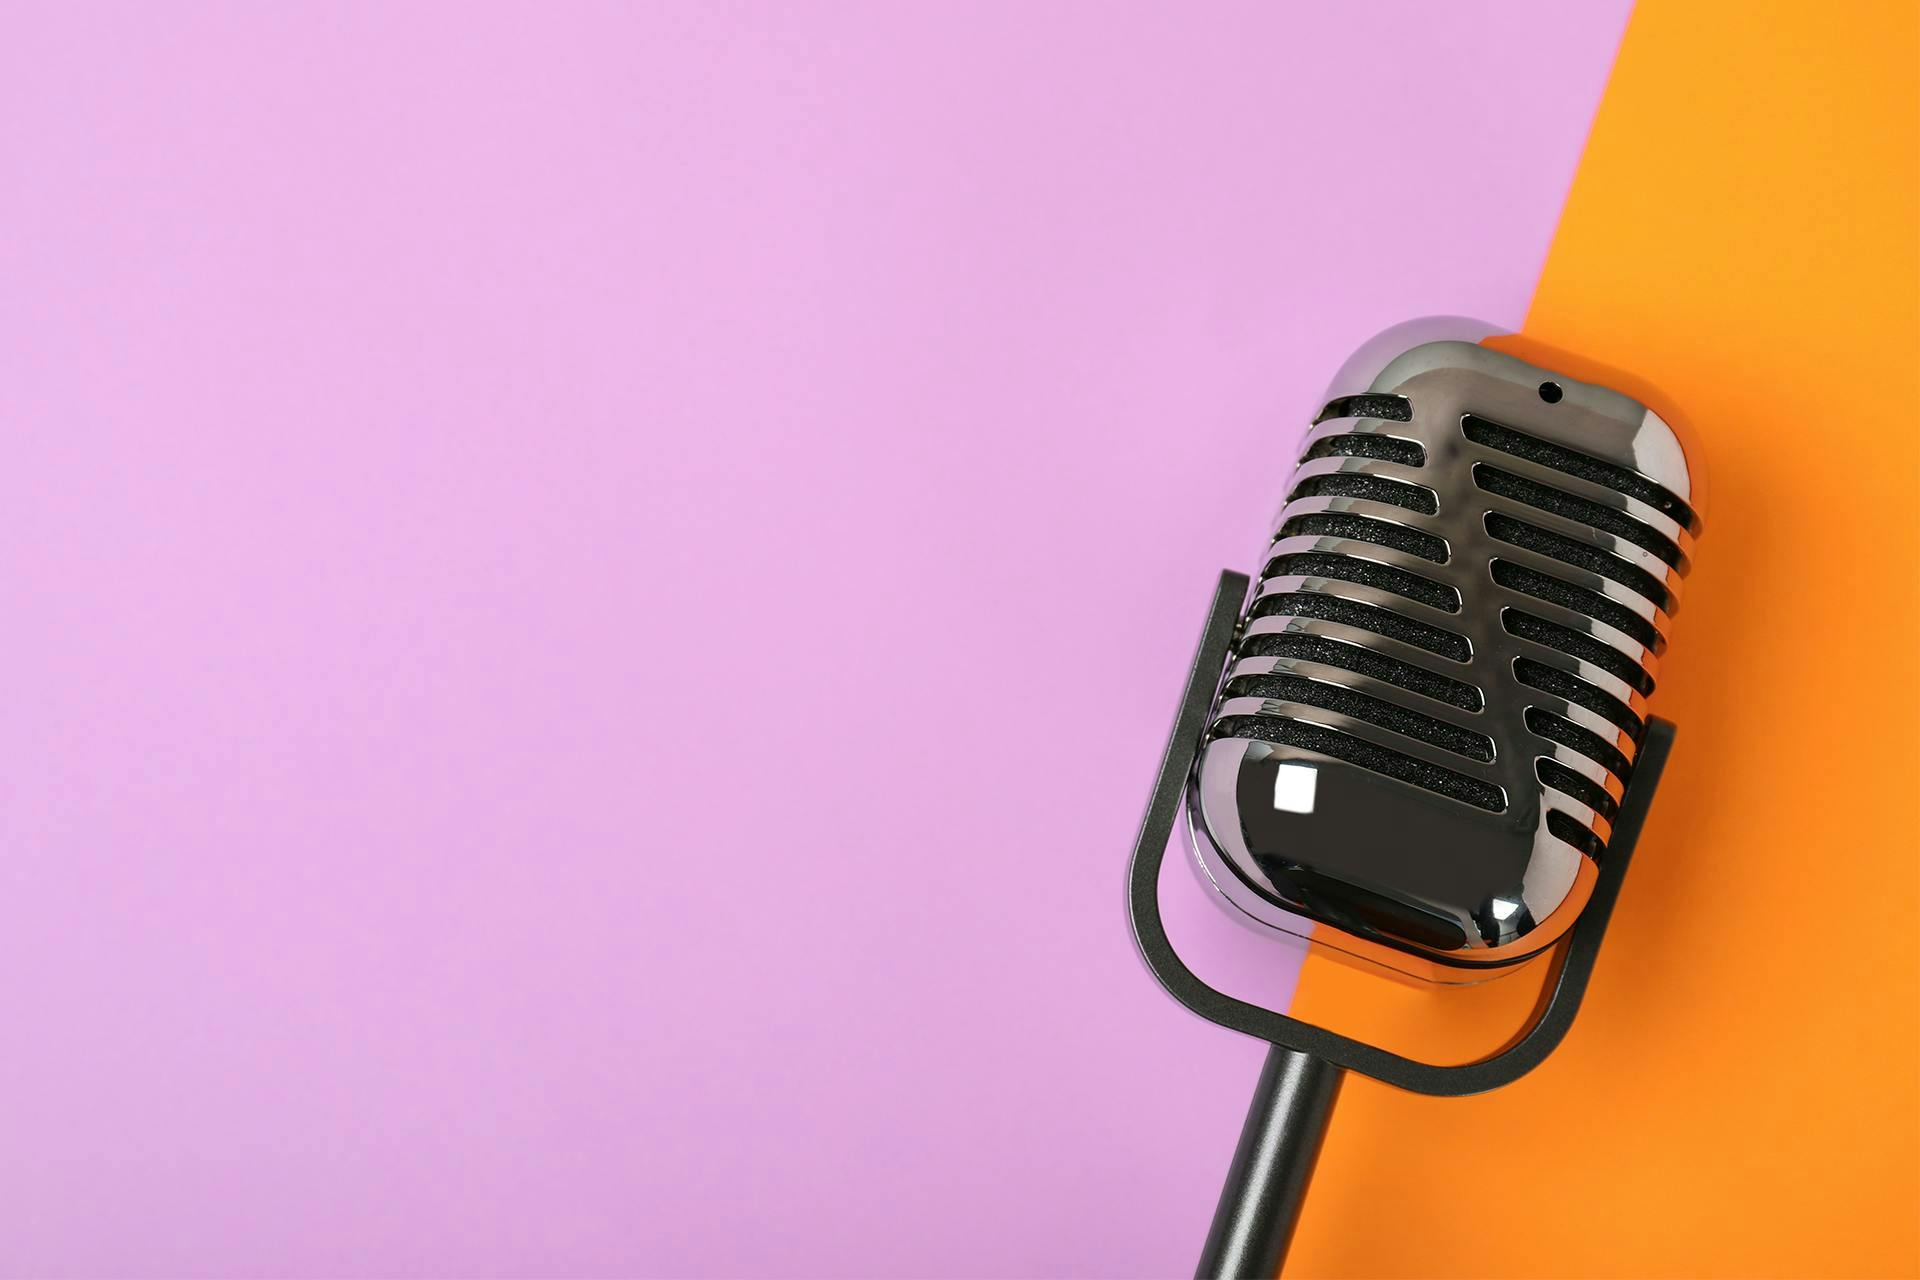 Looking for the latest social media news? This blog has it. This image of a retro-looking microphone against a solid background conveys the message that news is being broadcast